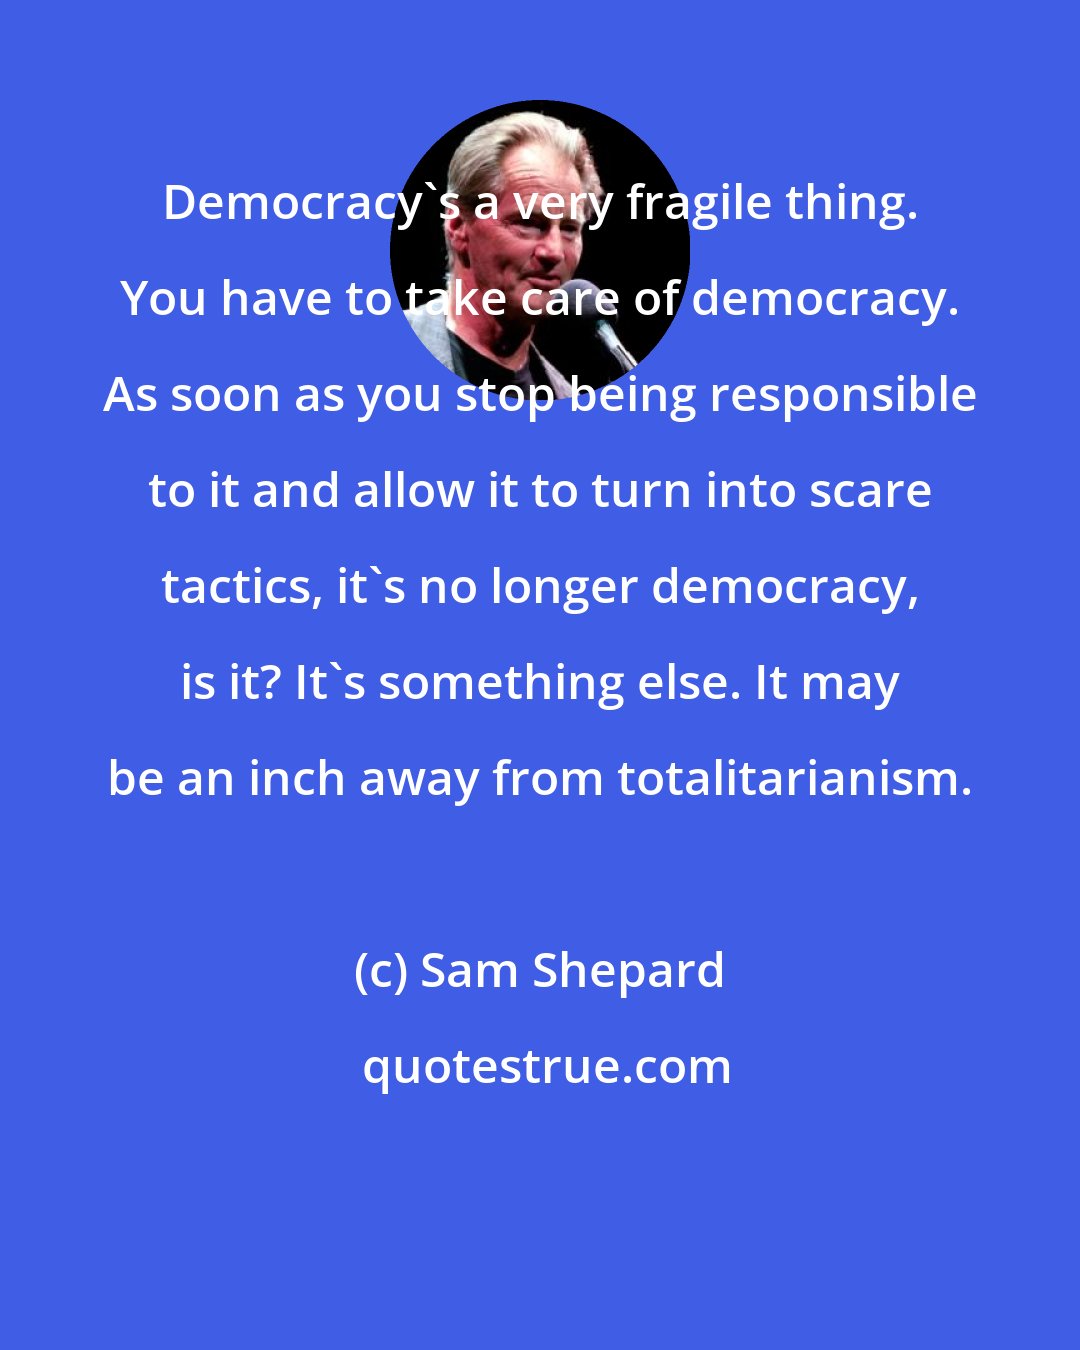 Sam Shepard: Democracy's a very fragile thing. You have to take care of democracy. As soon as you stop being responsible to it and allow it to turn into scare tactics, it's no longer democracy, is it? It's something else. It may be an inch away from totalitarianism.